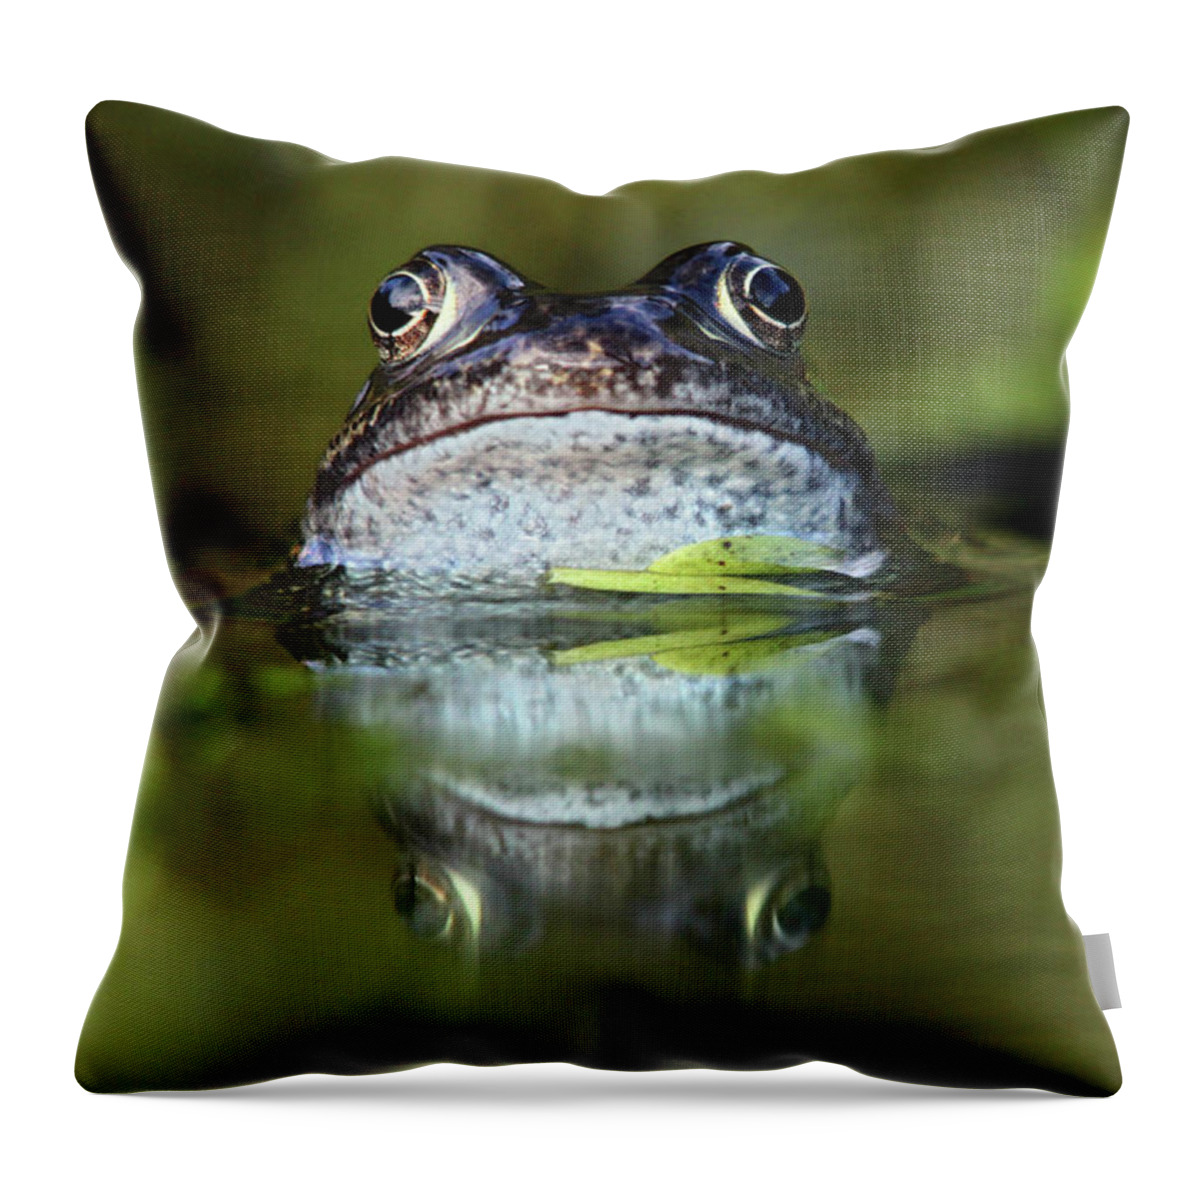 Animal Themes Throw Pillow featuring the photograph Common Frog In Pond by Iain Lawrie